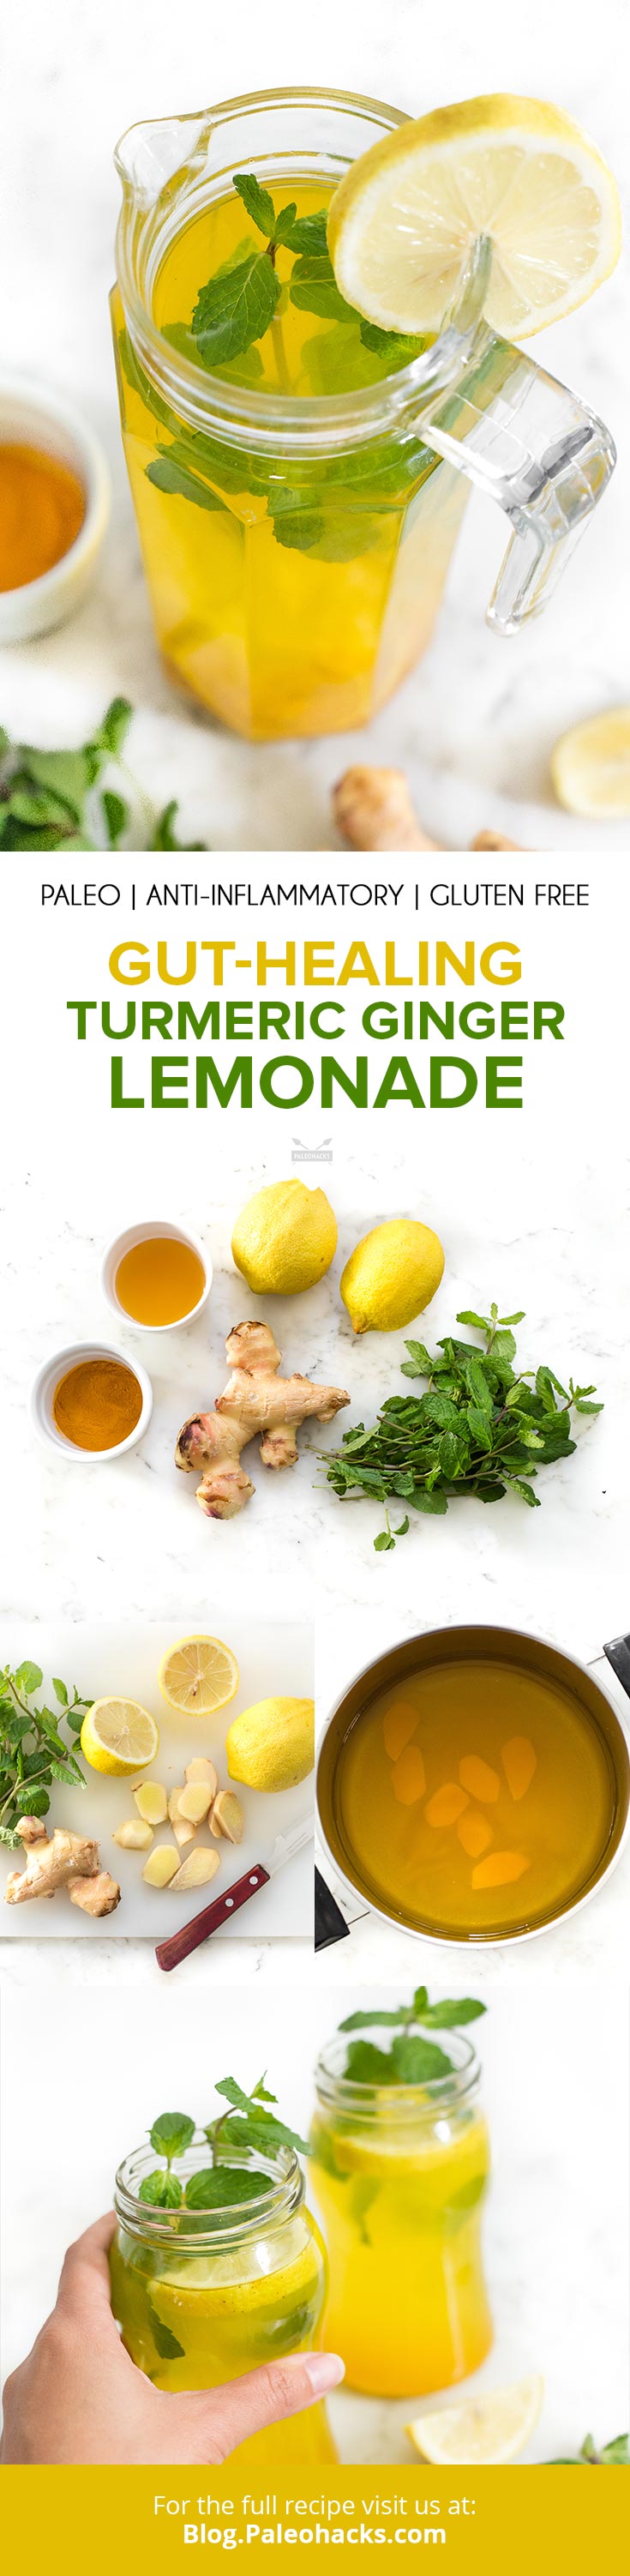 Whip up this refreshing lemonade for a crowd, complete with the gut-boosting and anti-inflammatory properties of fresh ginger and turmeric.